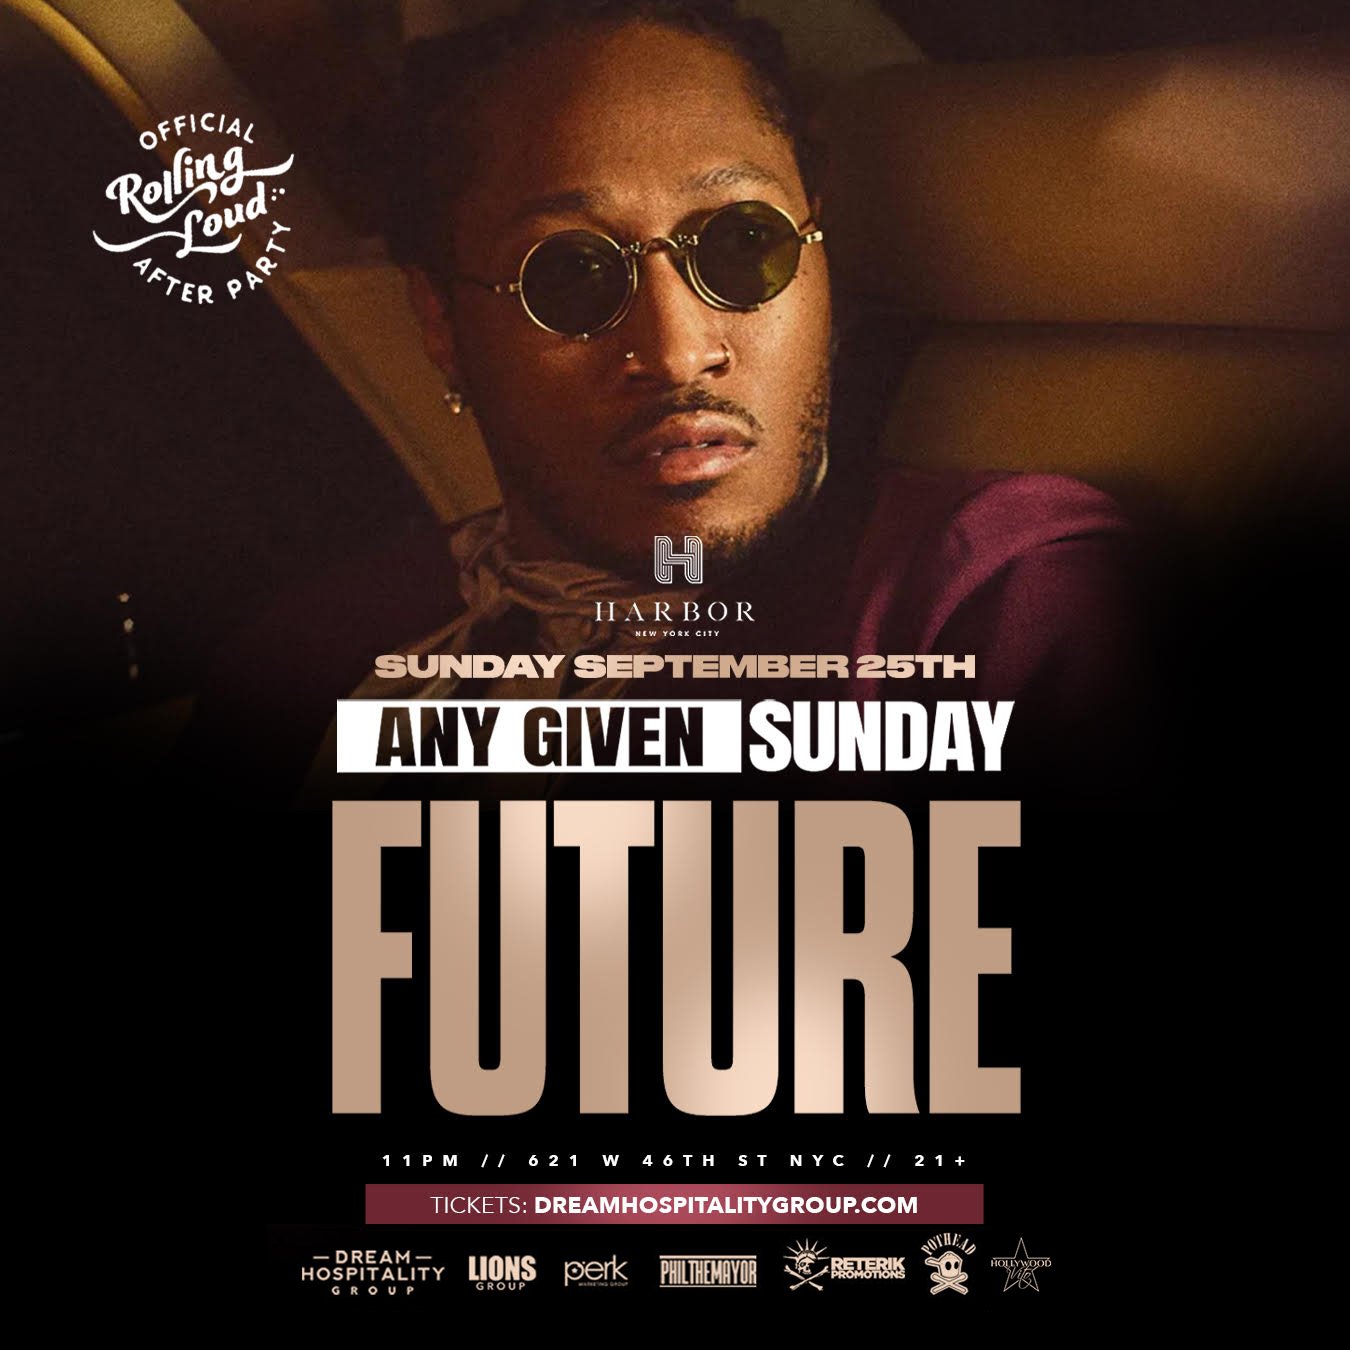 THIS SUNDAY‼️ I'll be DJn @RollingLoud at the VIP LOUD CLUB👨🏽‍🔬🚀  @Future Will be headlining 🧙🏽‍♂️🎥